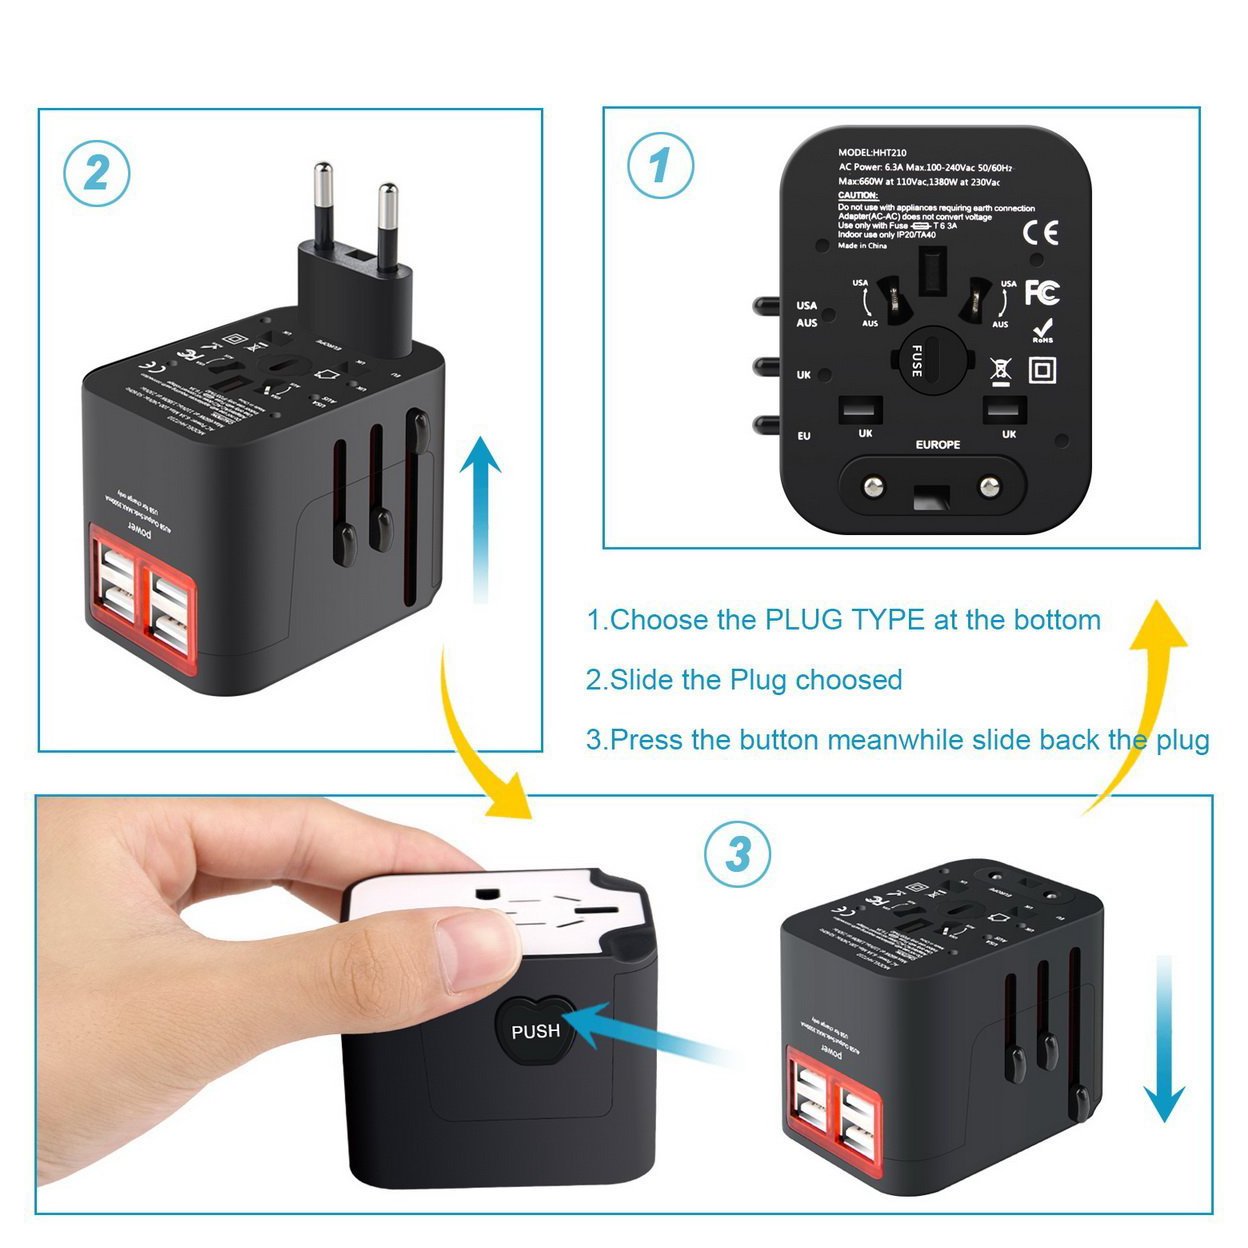 Worldwide Plug Adapter With 4 Port USB Fast Charger And A Surge